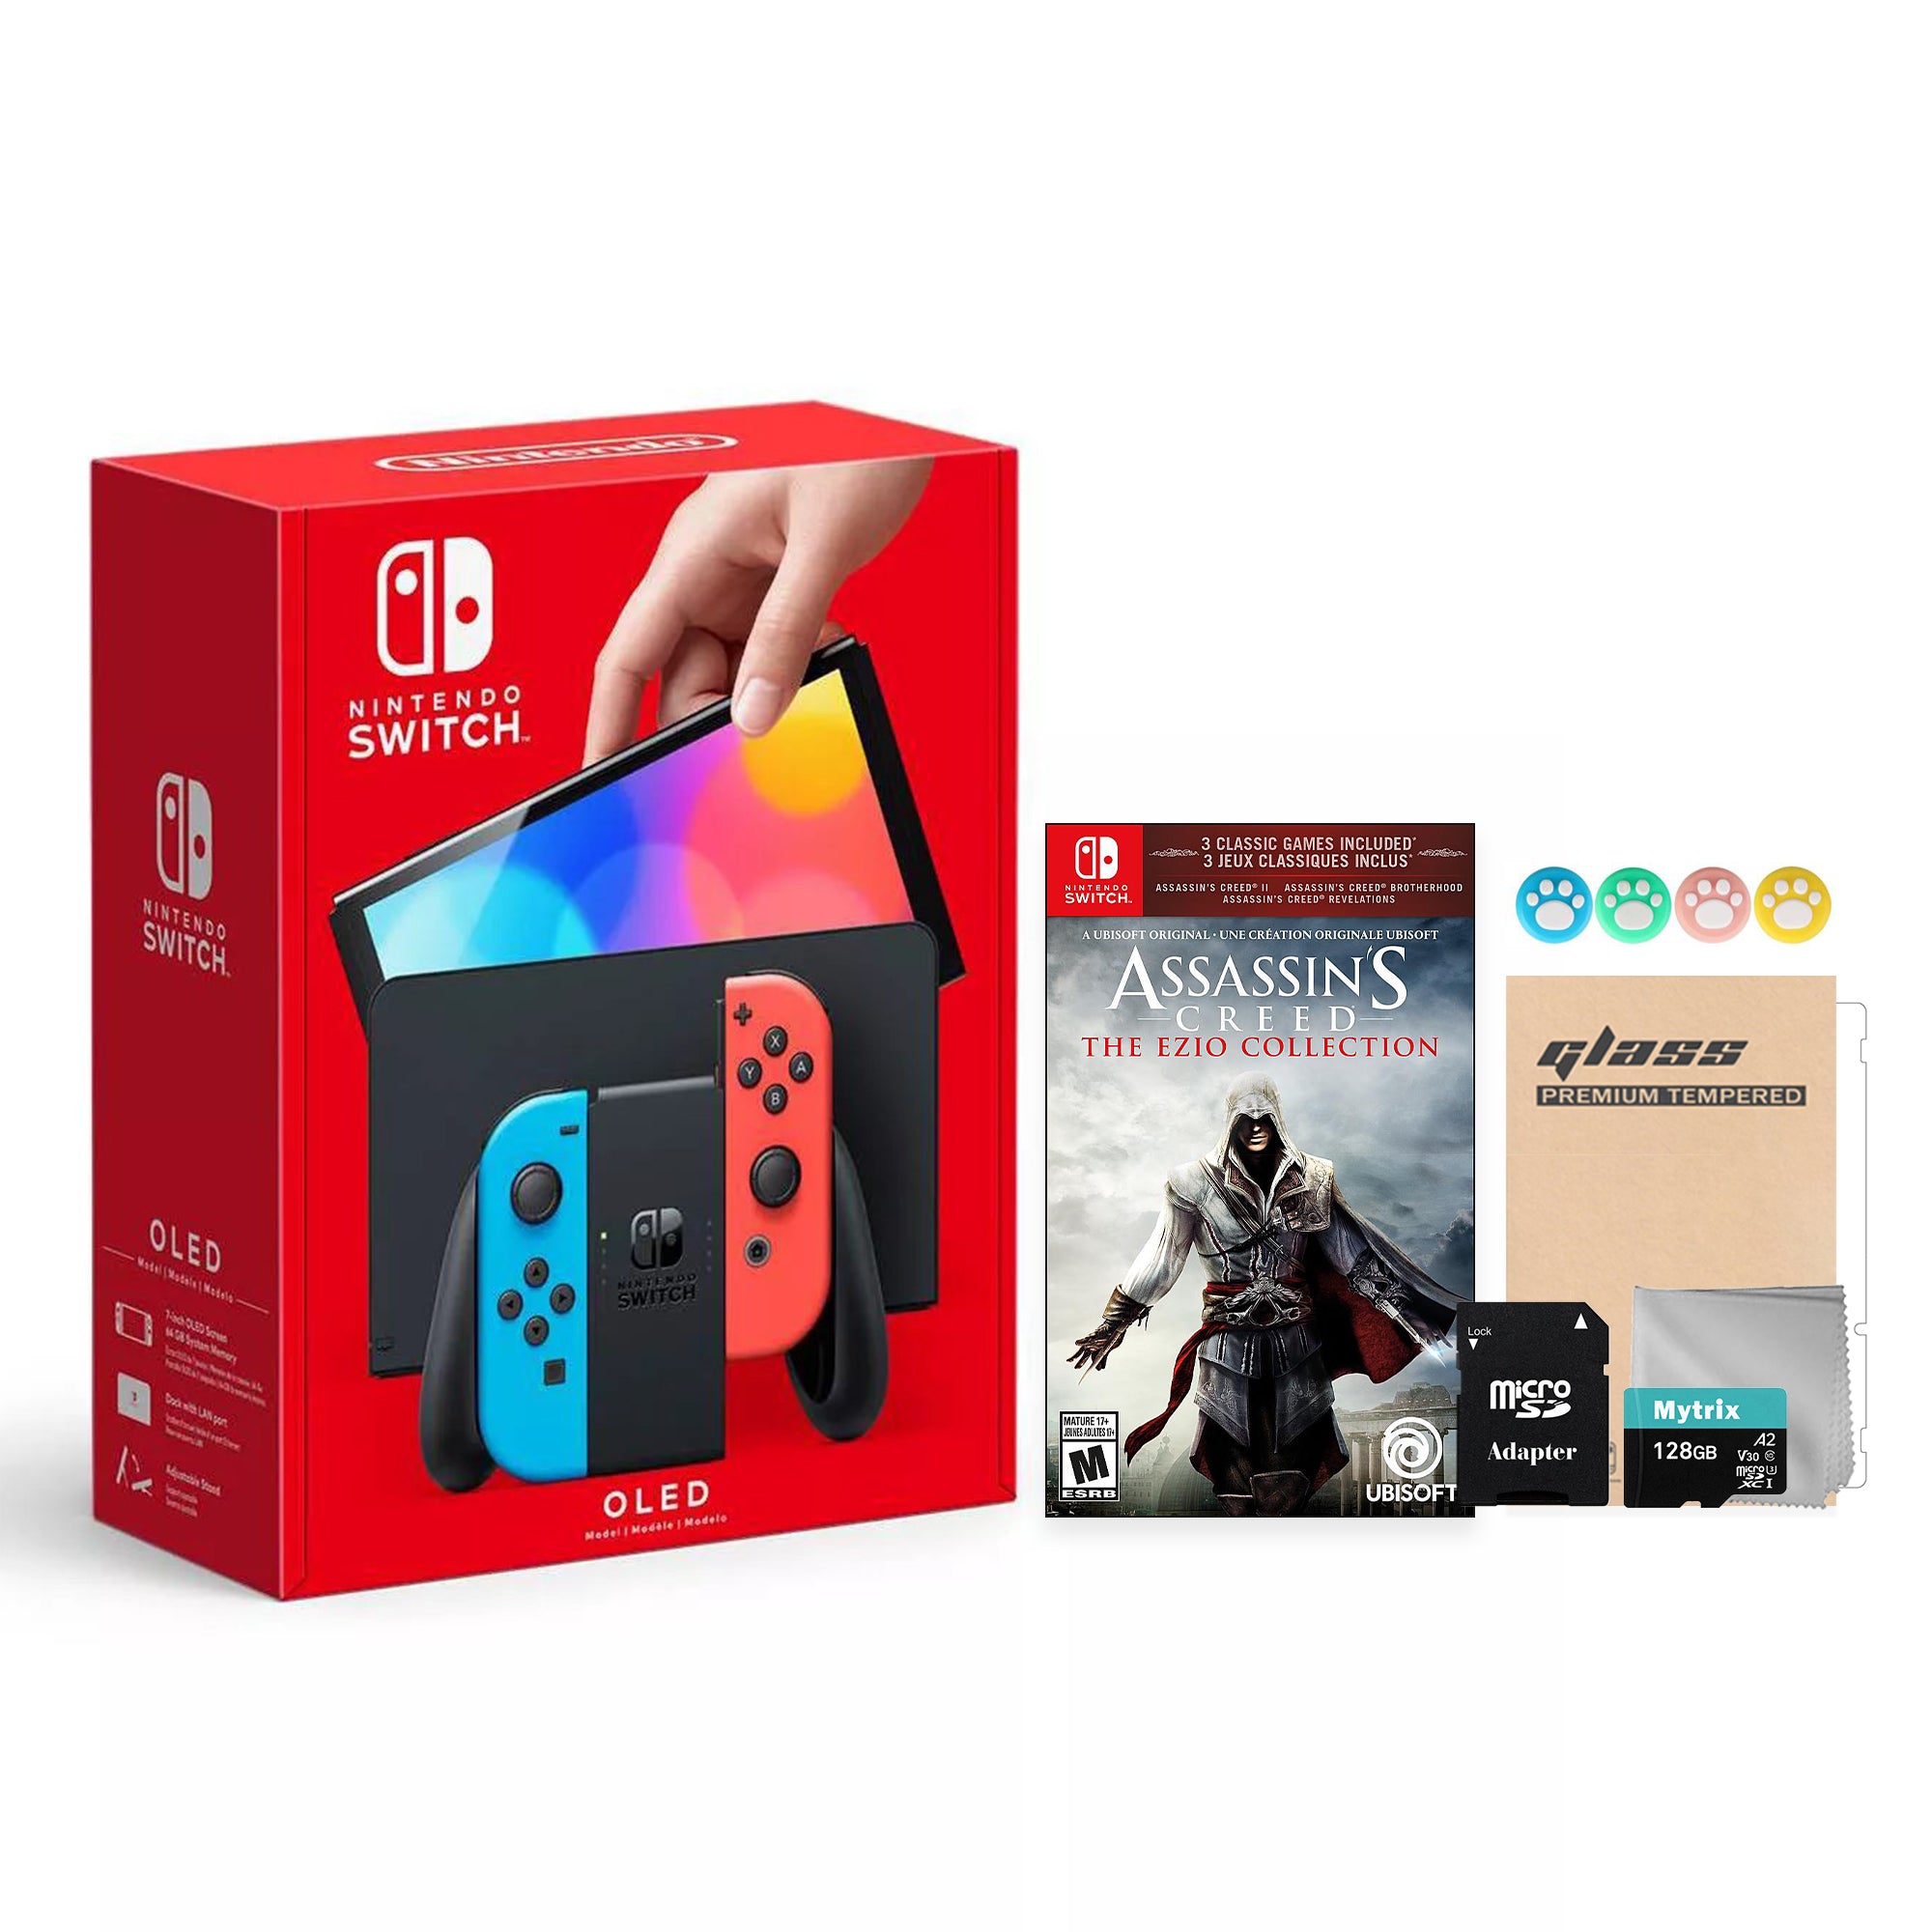 2022 New Nintendo Switch OLED Model Neon Red Blue Joy Con 64GB Console Improved HD Screen & LAN-Port Dock with Assassin's Creed Ezio Collection, Mytrix 128GB MicroSD Card and Accessories